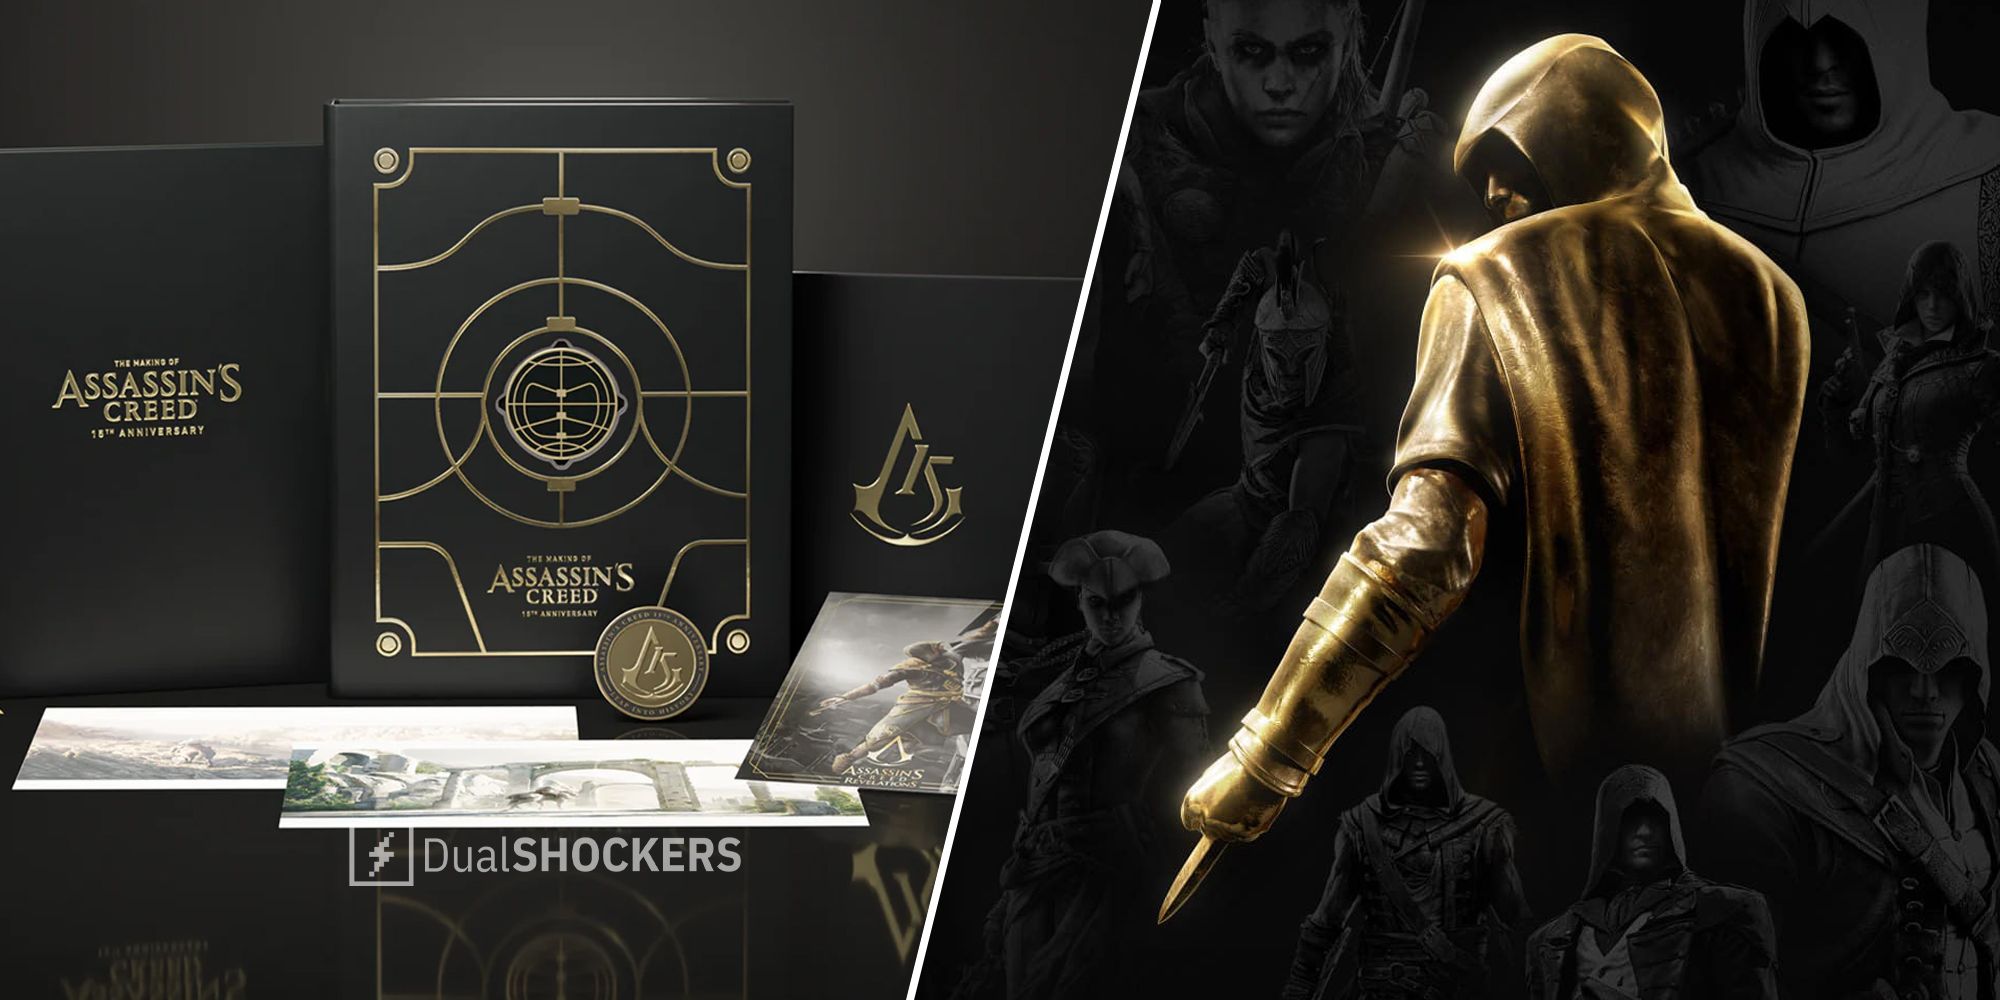 Assassin’s Creed Limited Edition 15th Anniversary Artbook Dark Horse